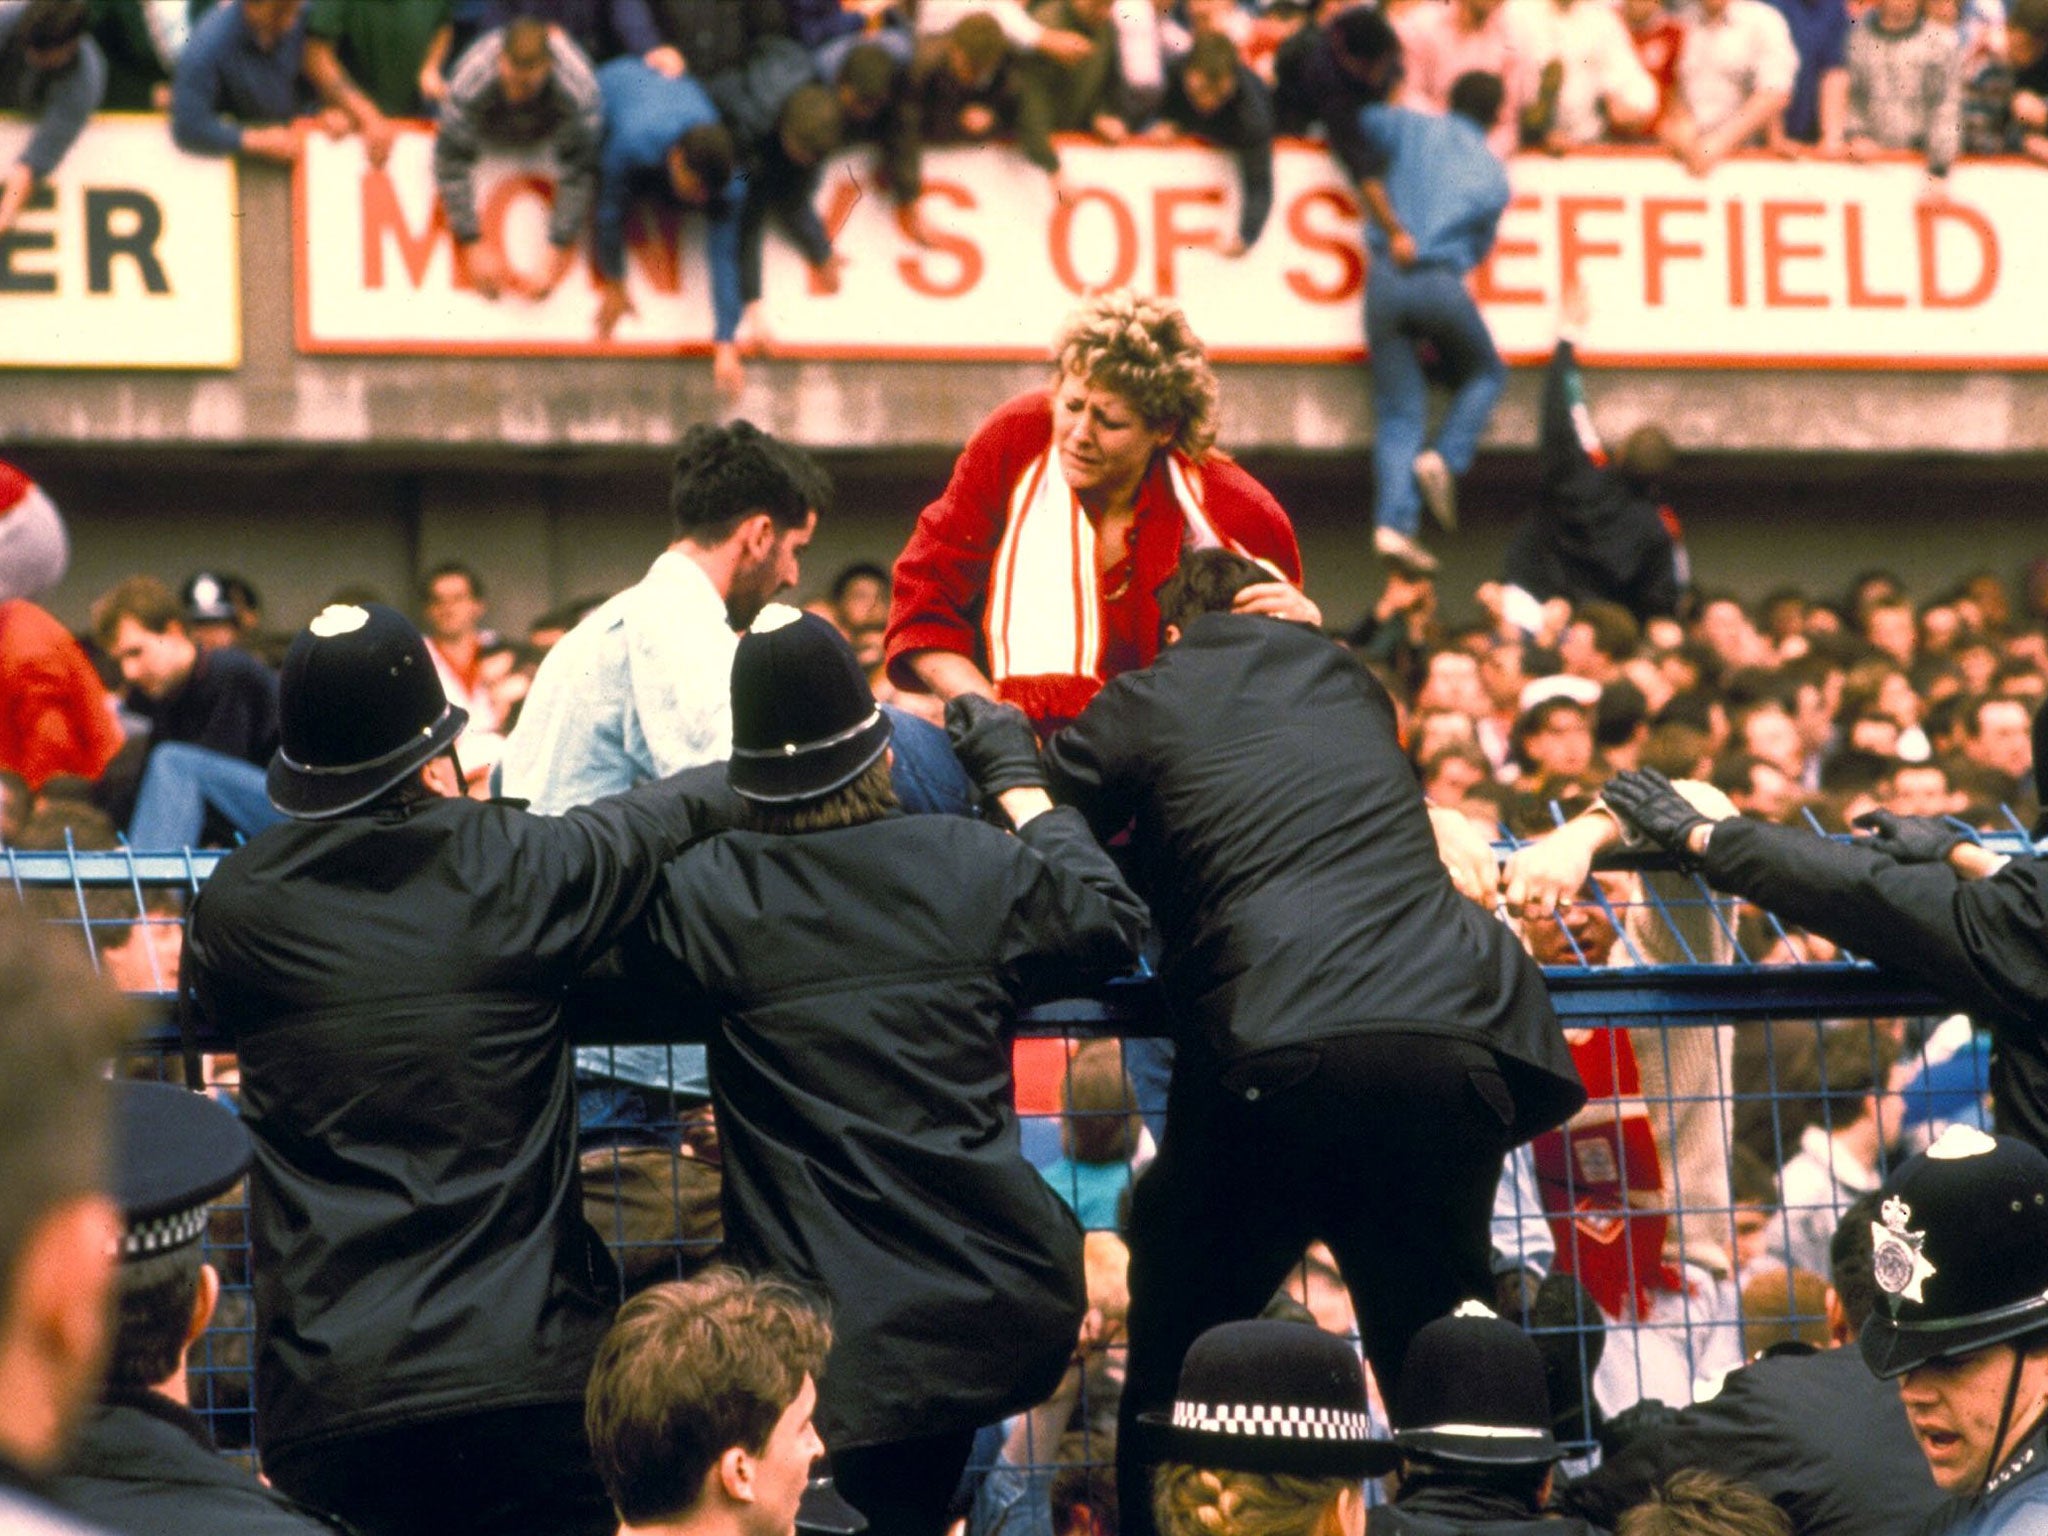 The police handling of Hillsborough was one in a long line of scandals